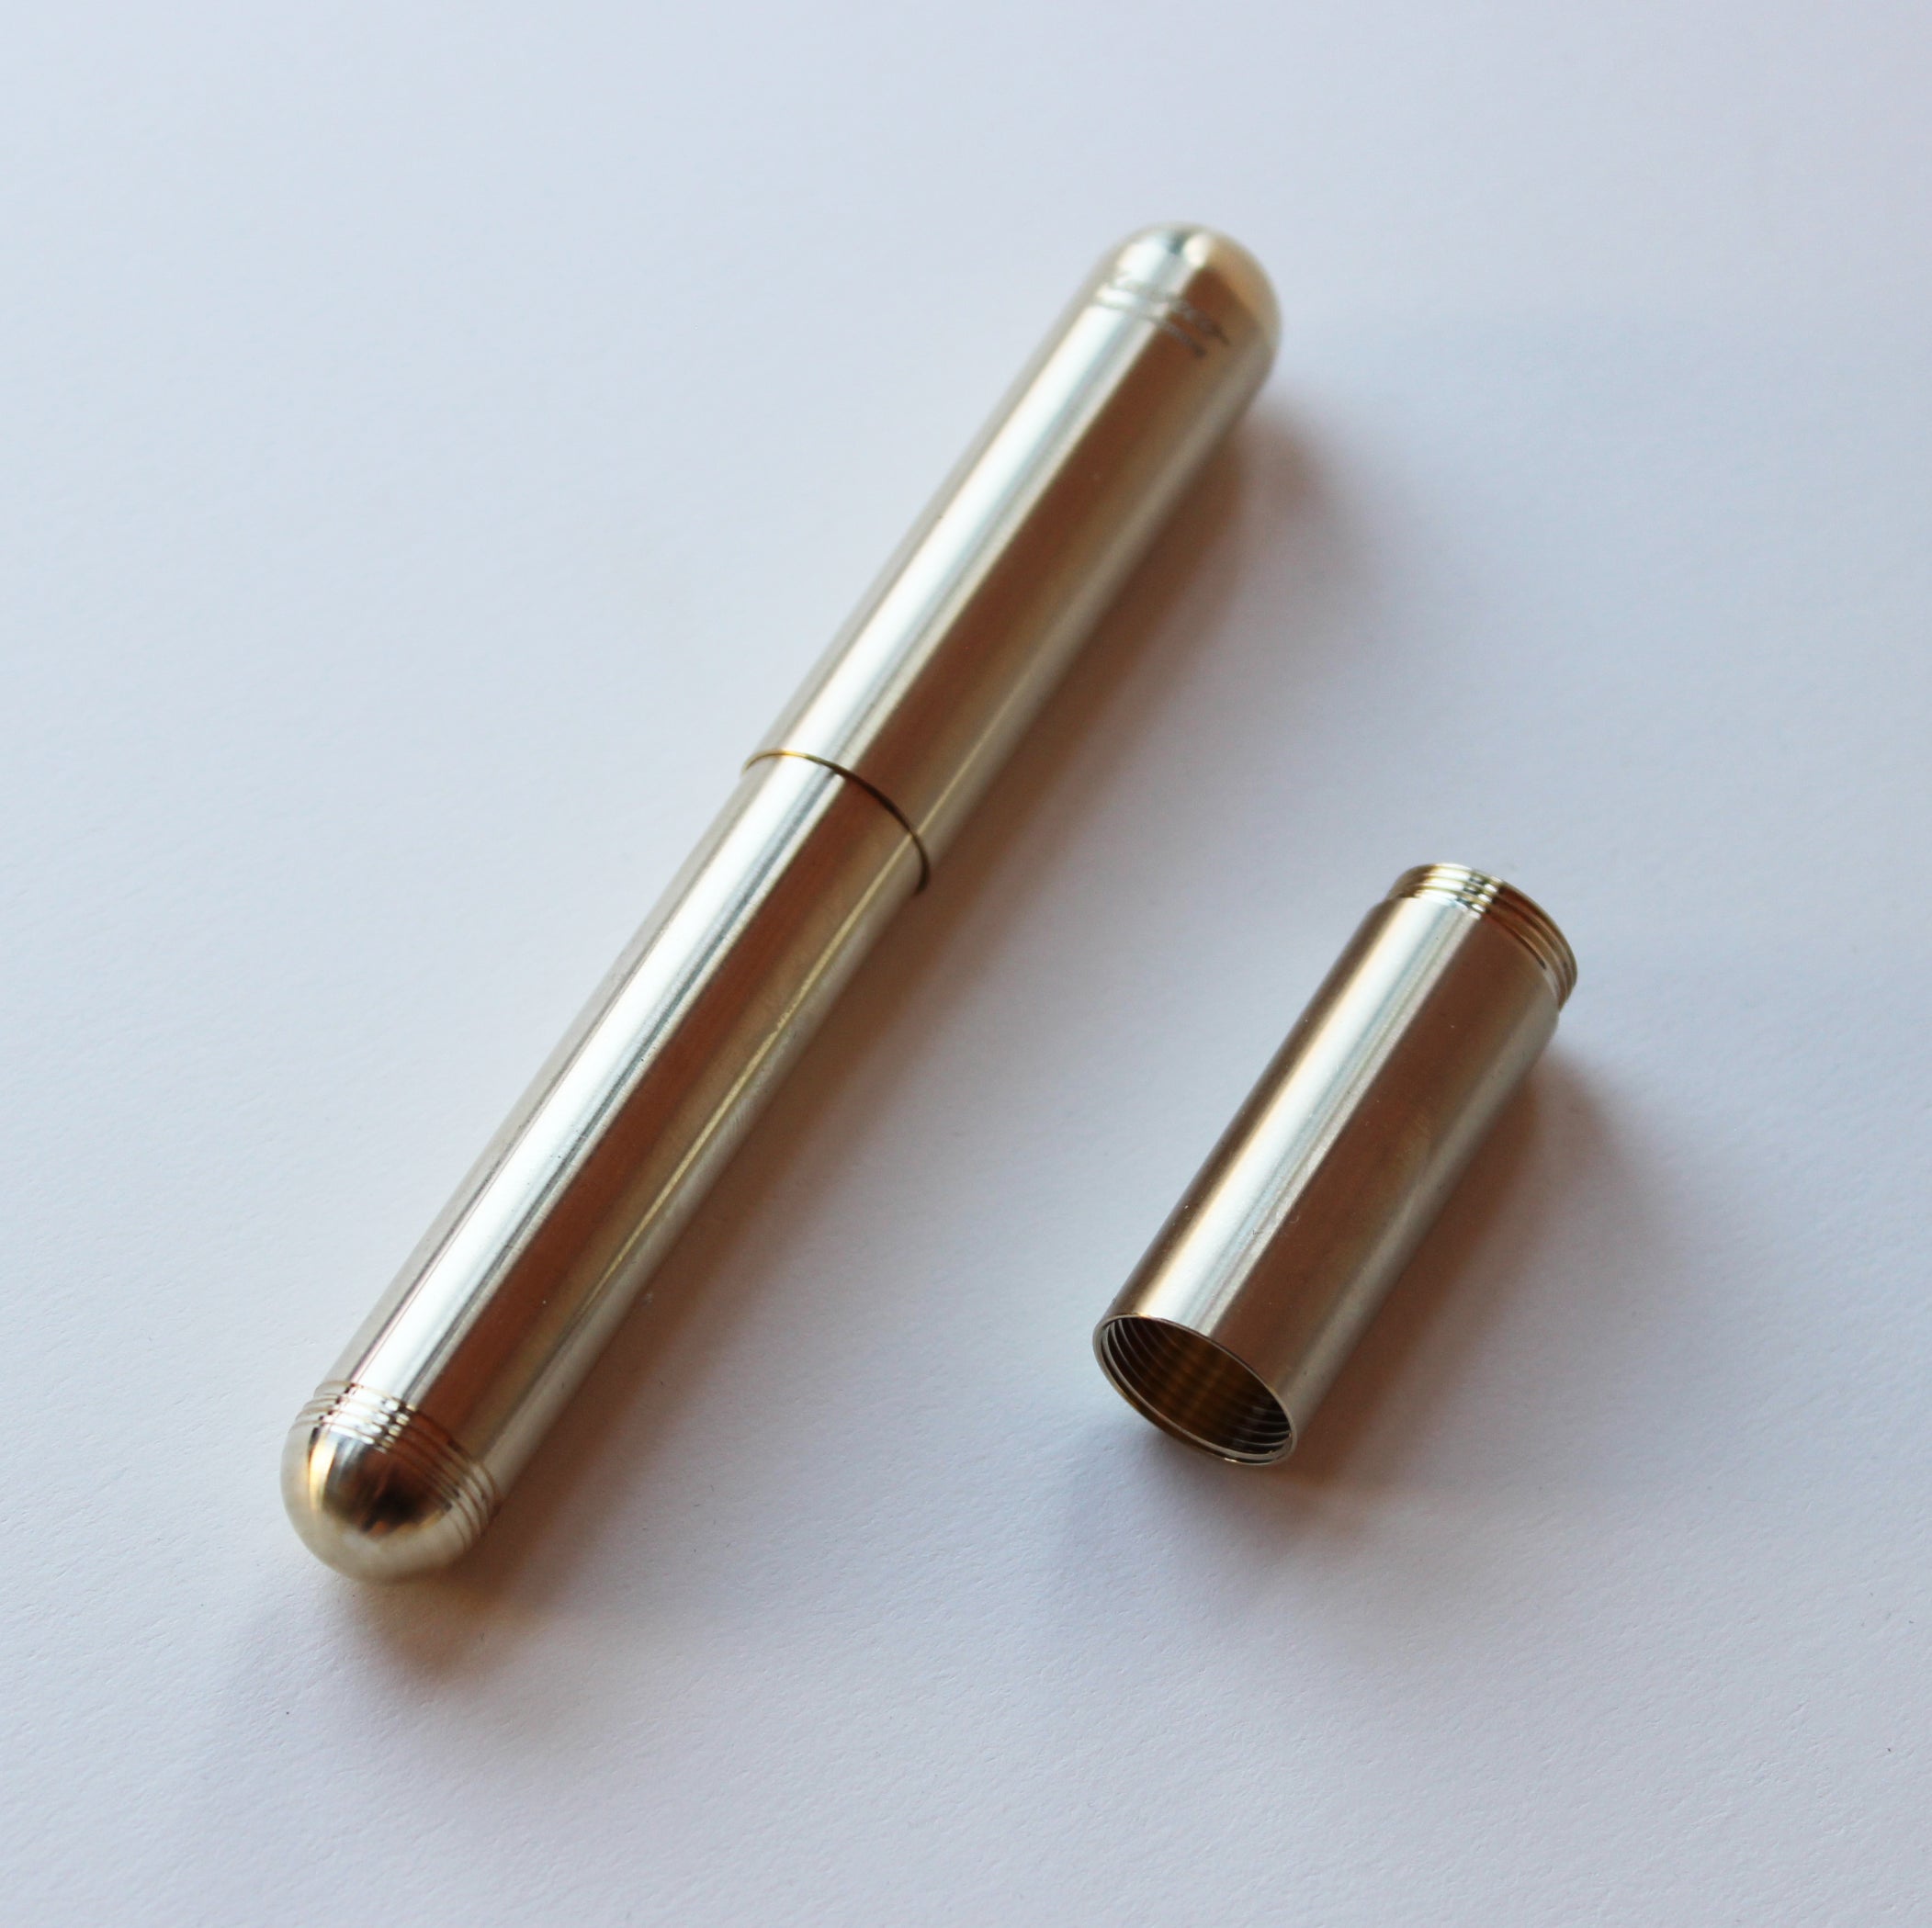 Kaweco Brass Supra Fountain Pen in smallest form with middle out